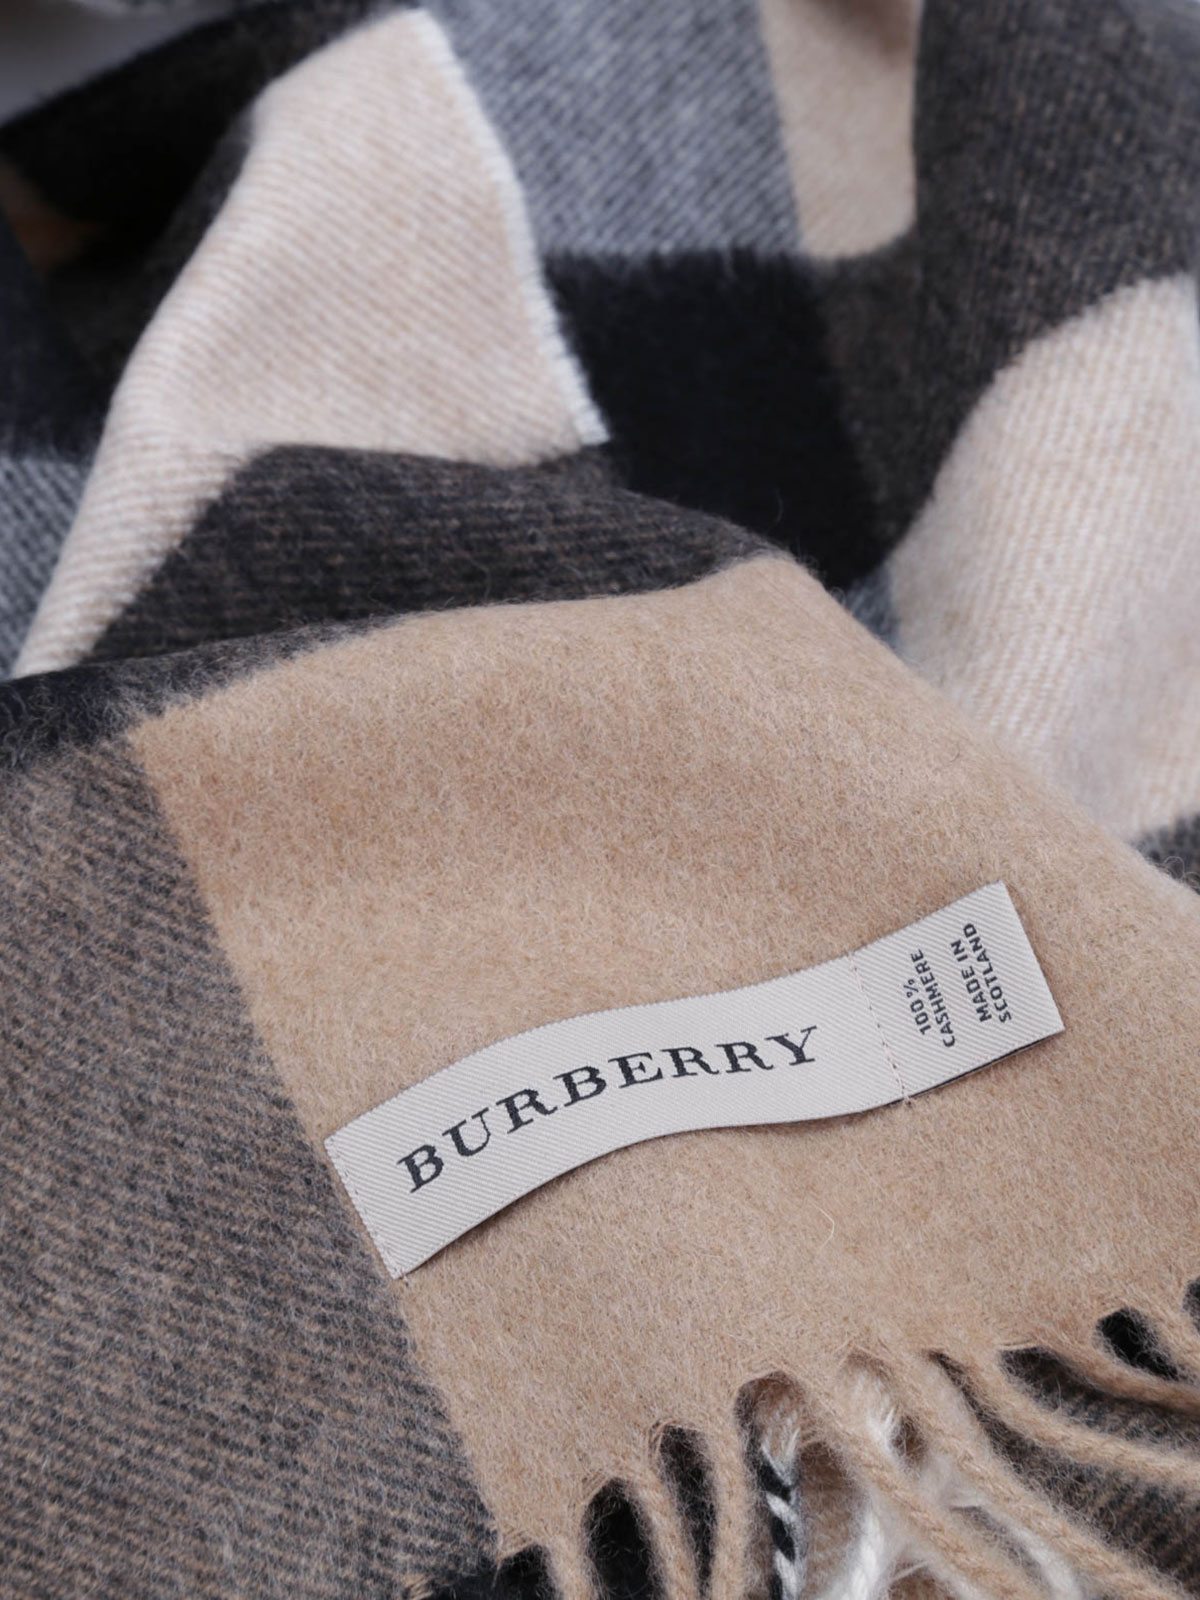 burberry scarf made in scotland